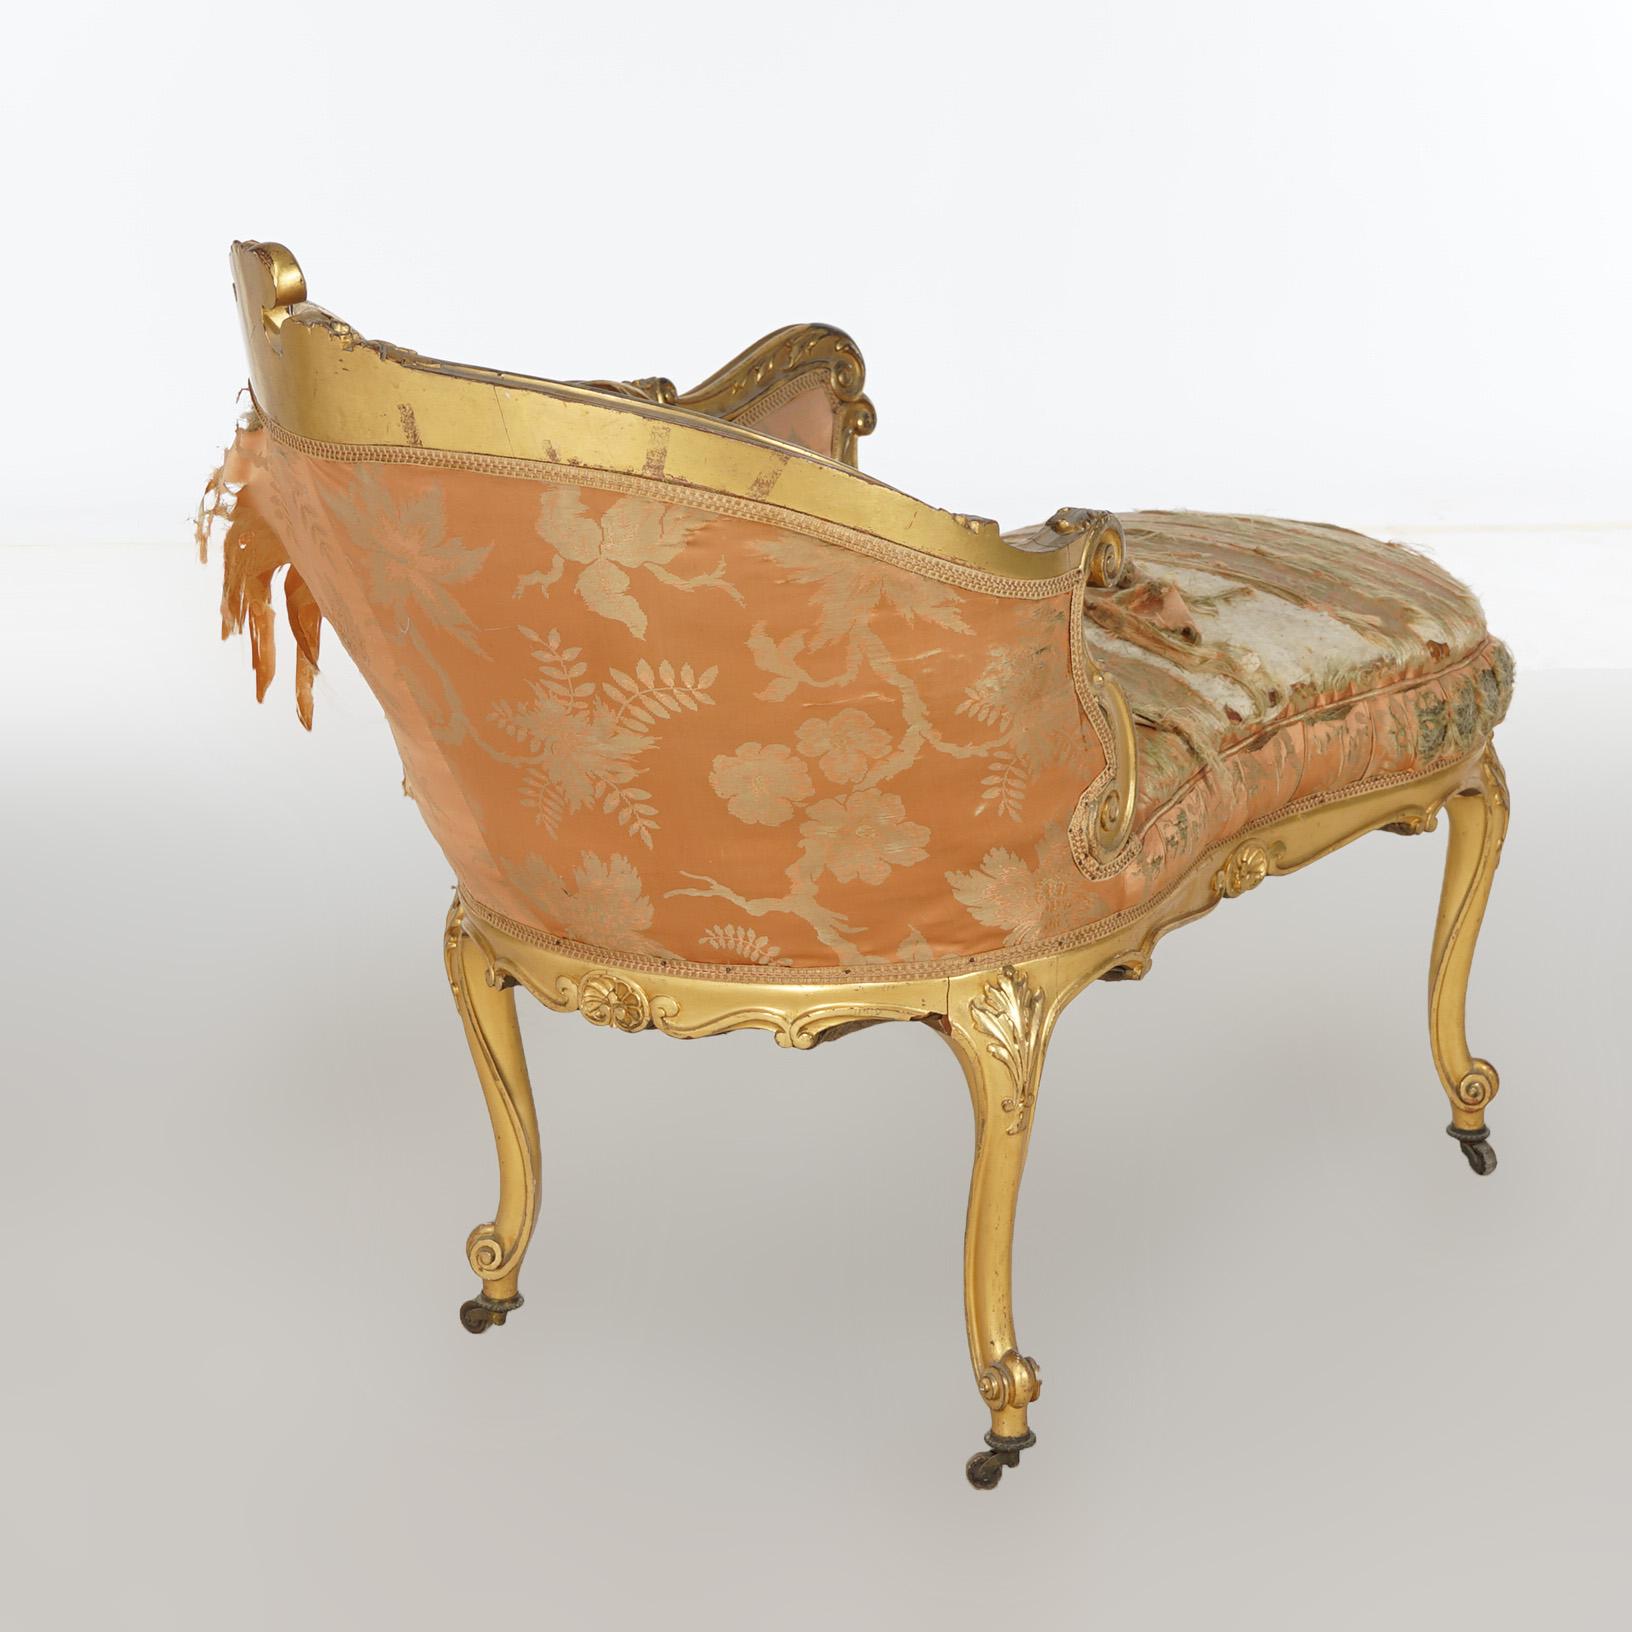 Early Antique French Rococo Vernis Martin & Giltwood Half-Recamier Settee 19th C For Sale 17